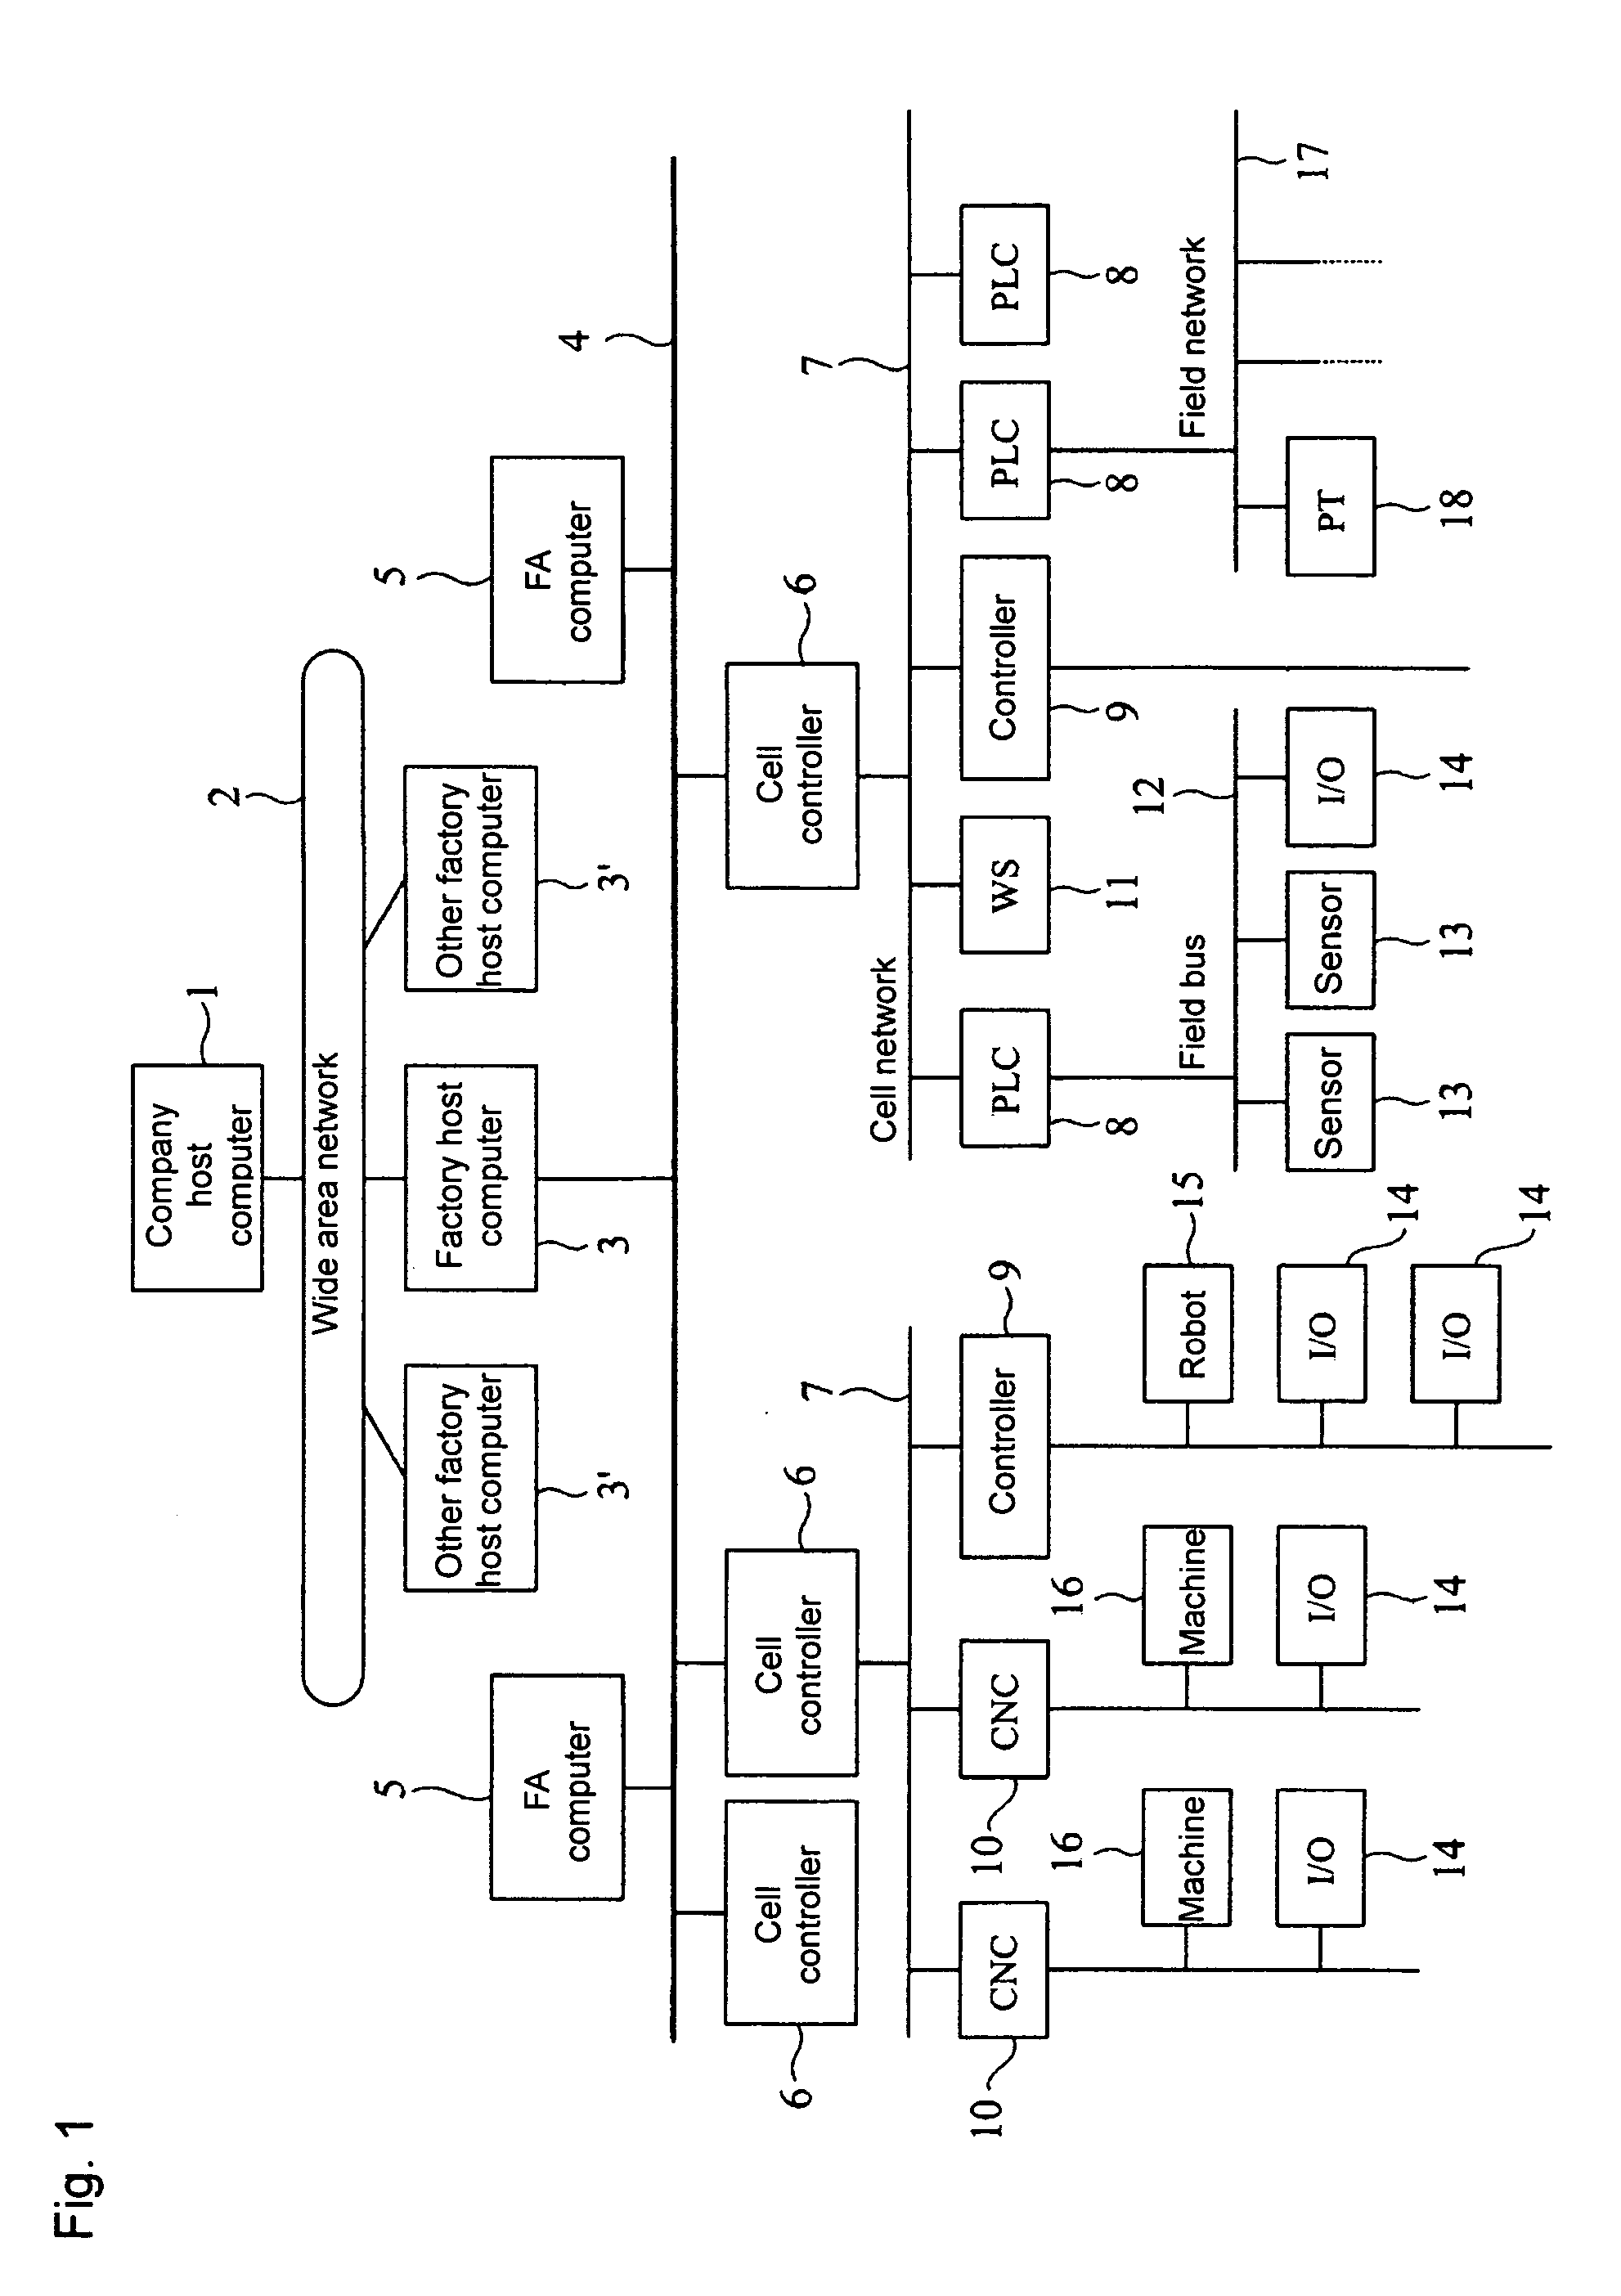 Control system apparatus, method for setting control system and setting program